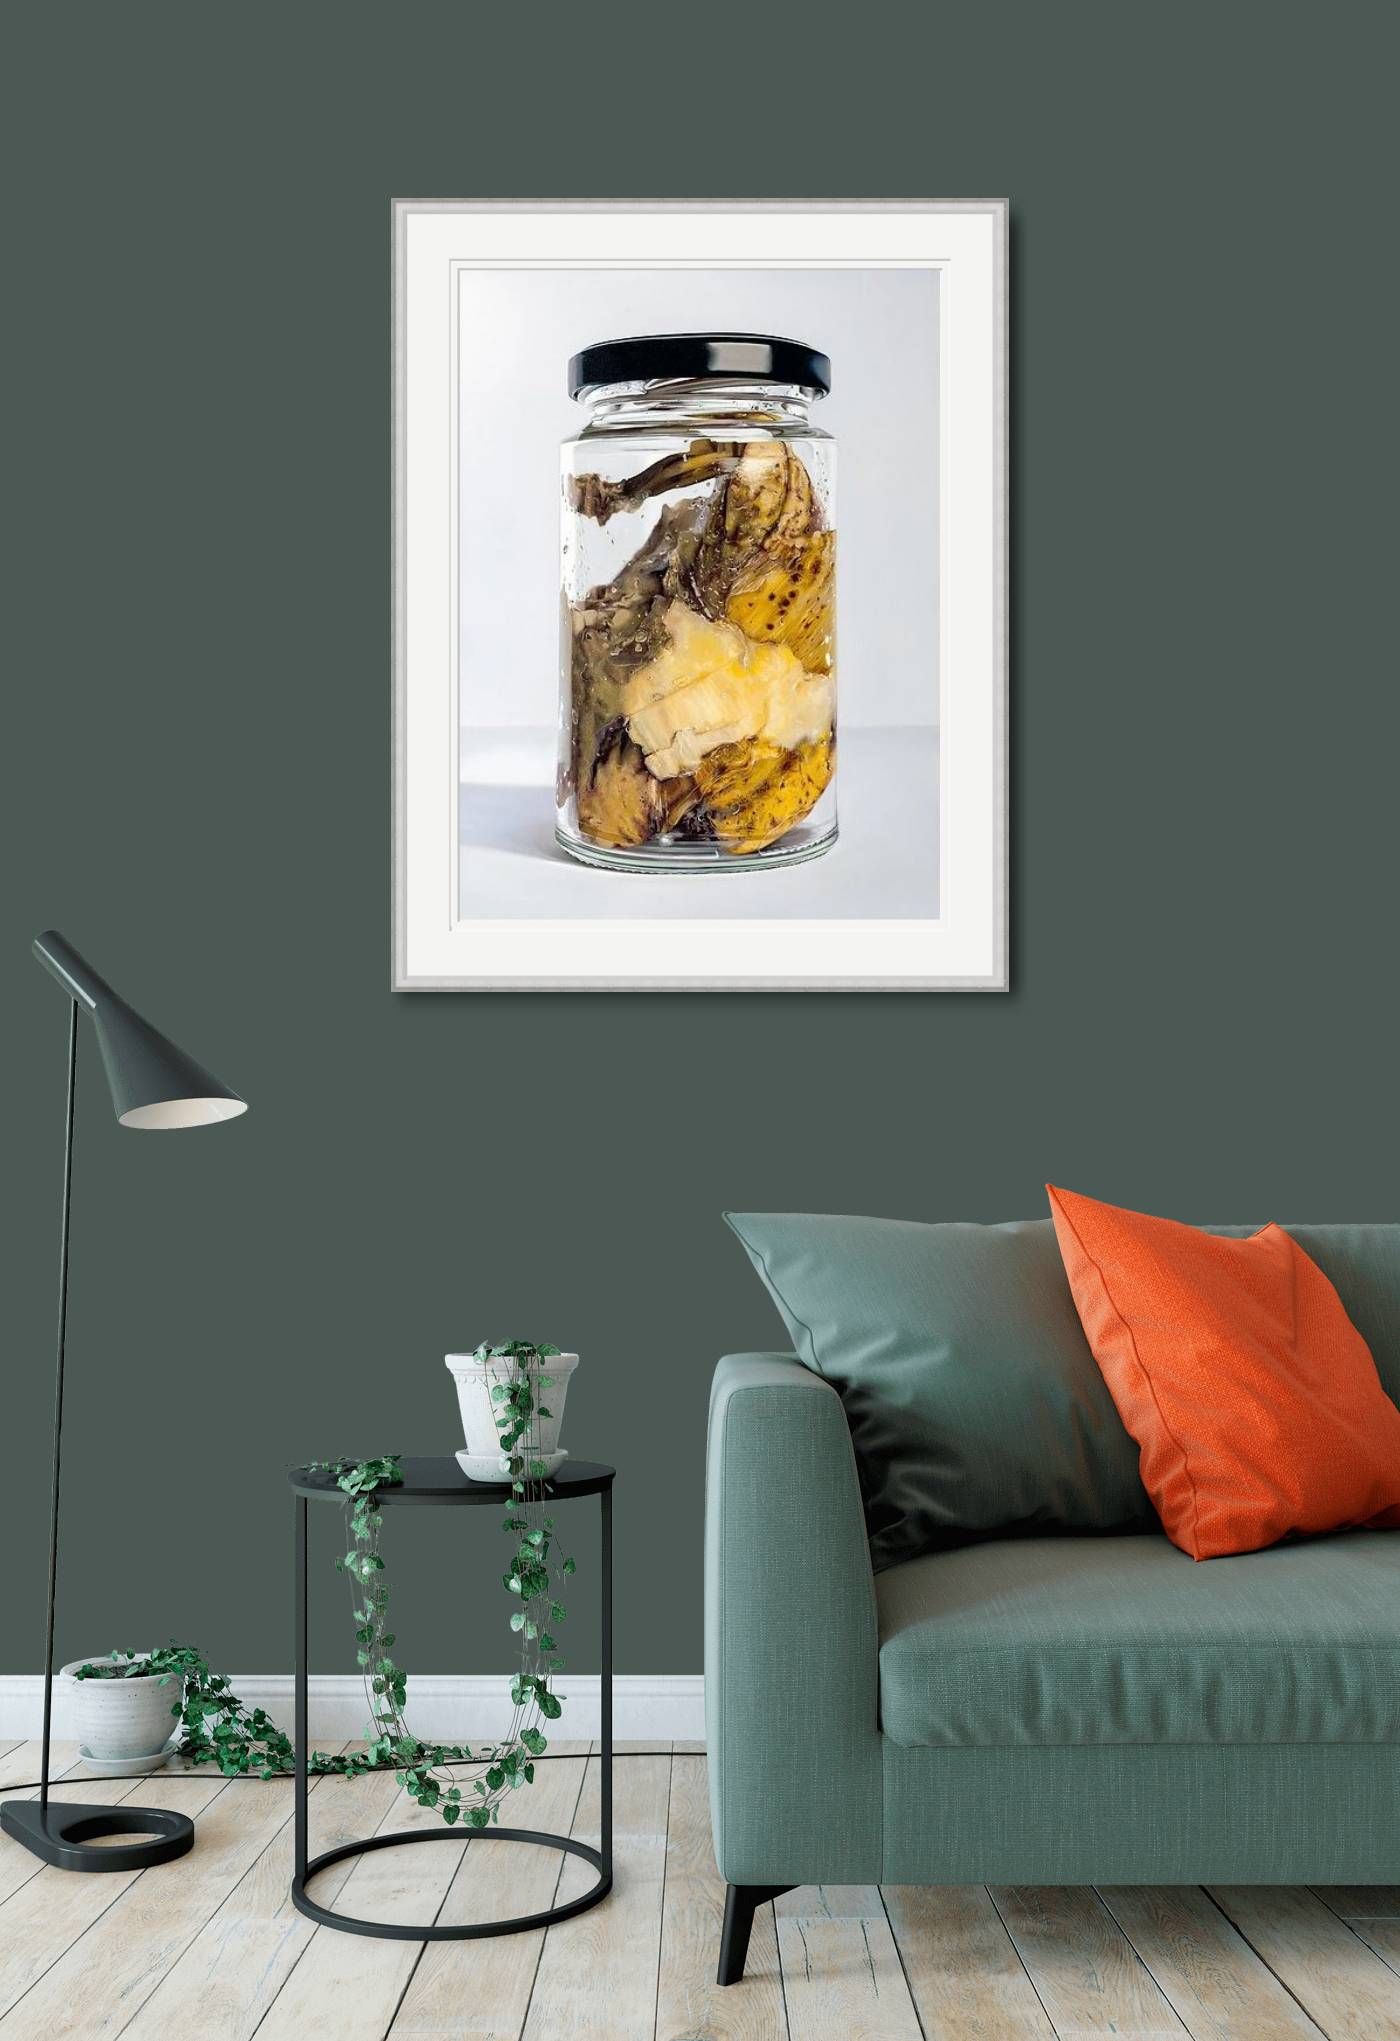 Small  - Banana in Jar by Stephen Johntson